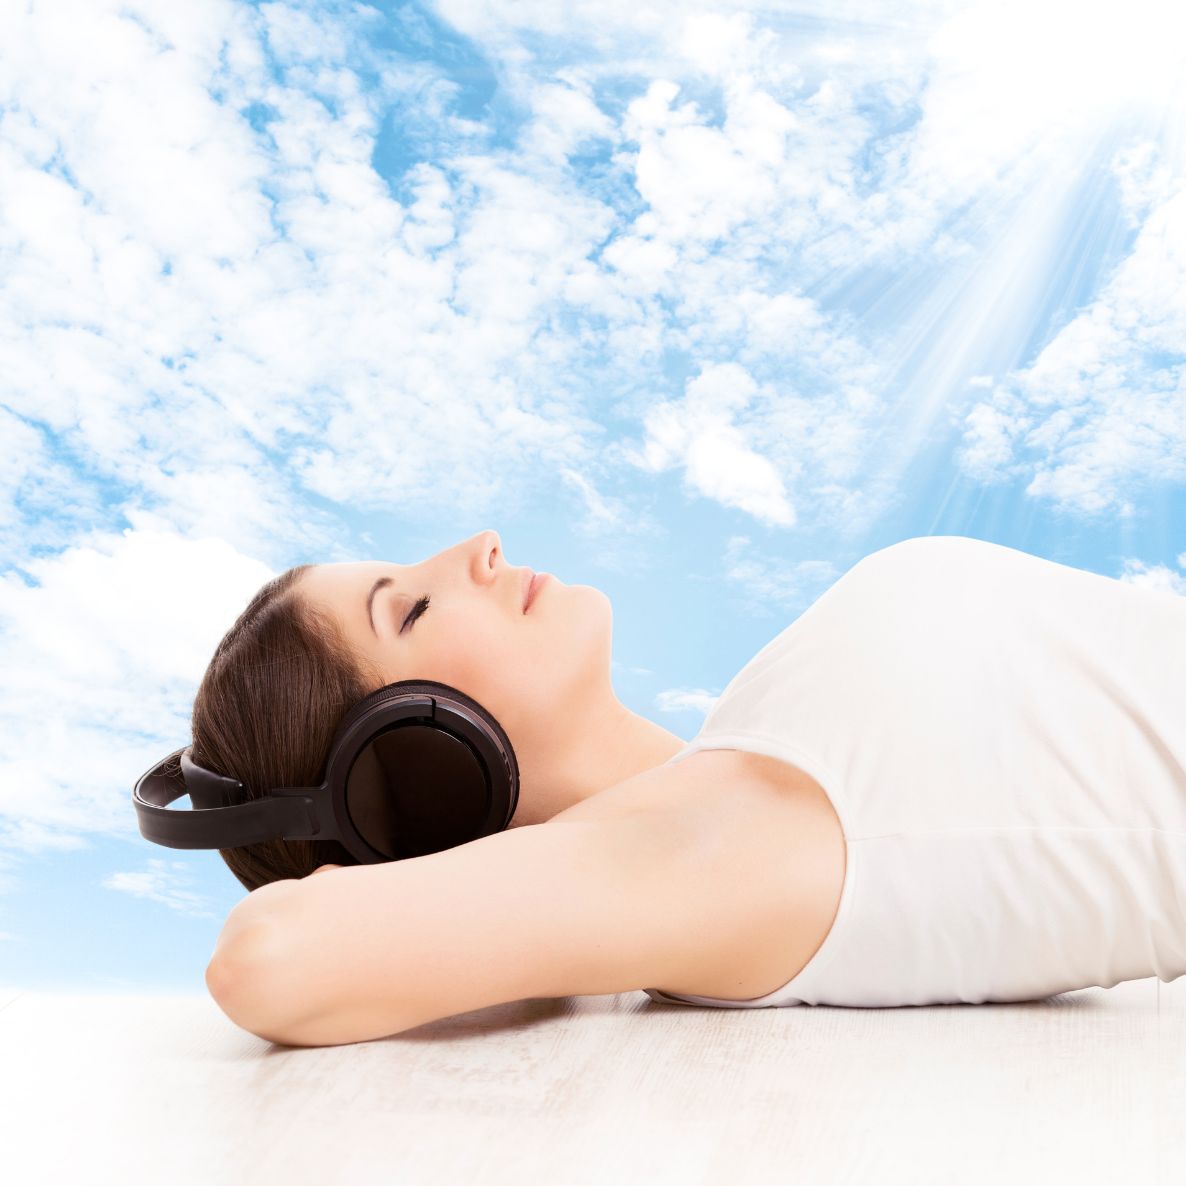 528hz Music on headphones can heal your life